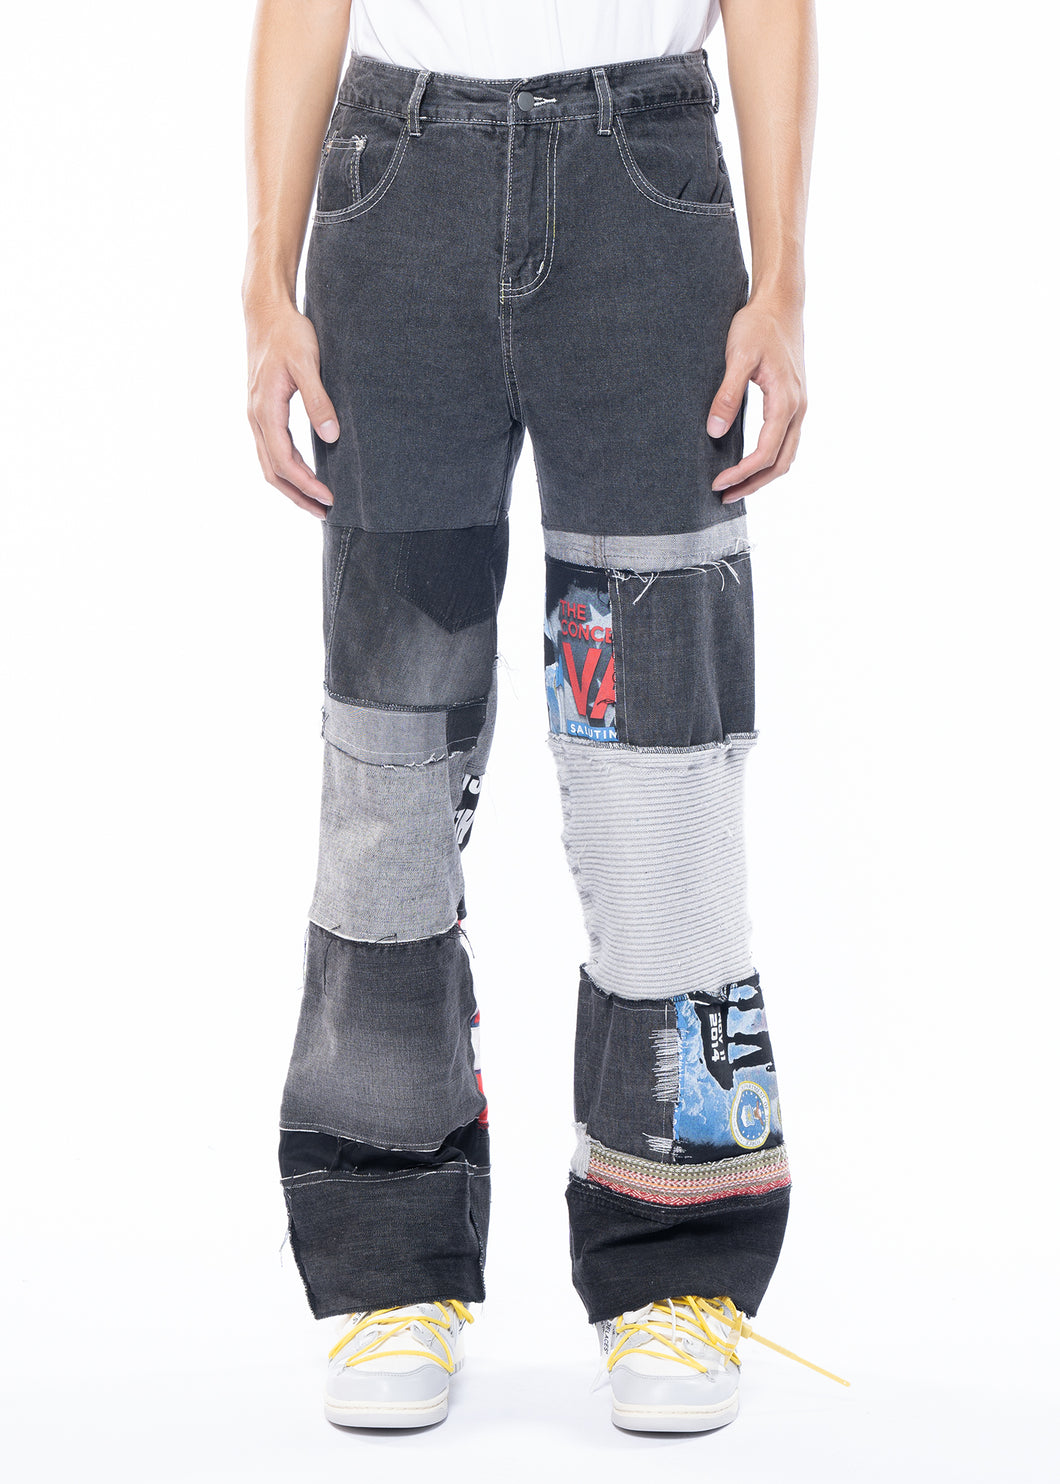 RANDOMEFFECT Straight Patched Jeans